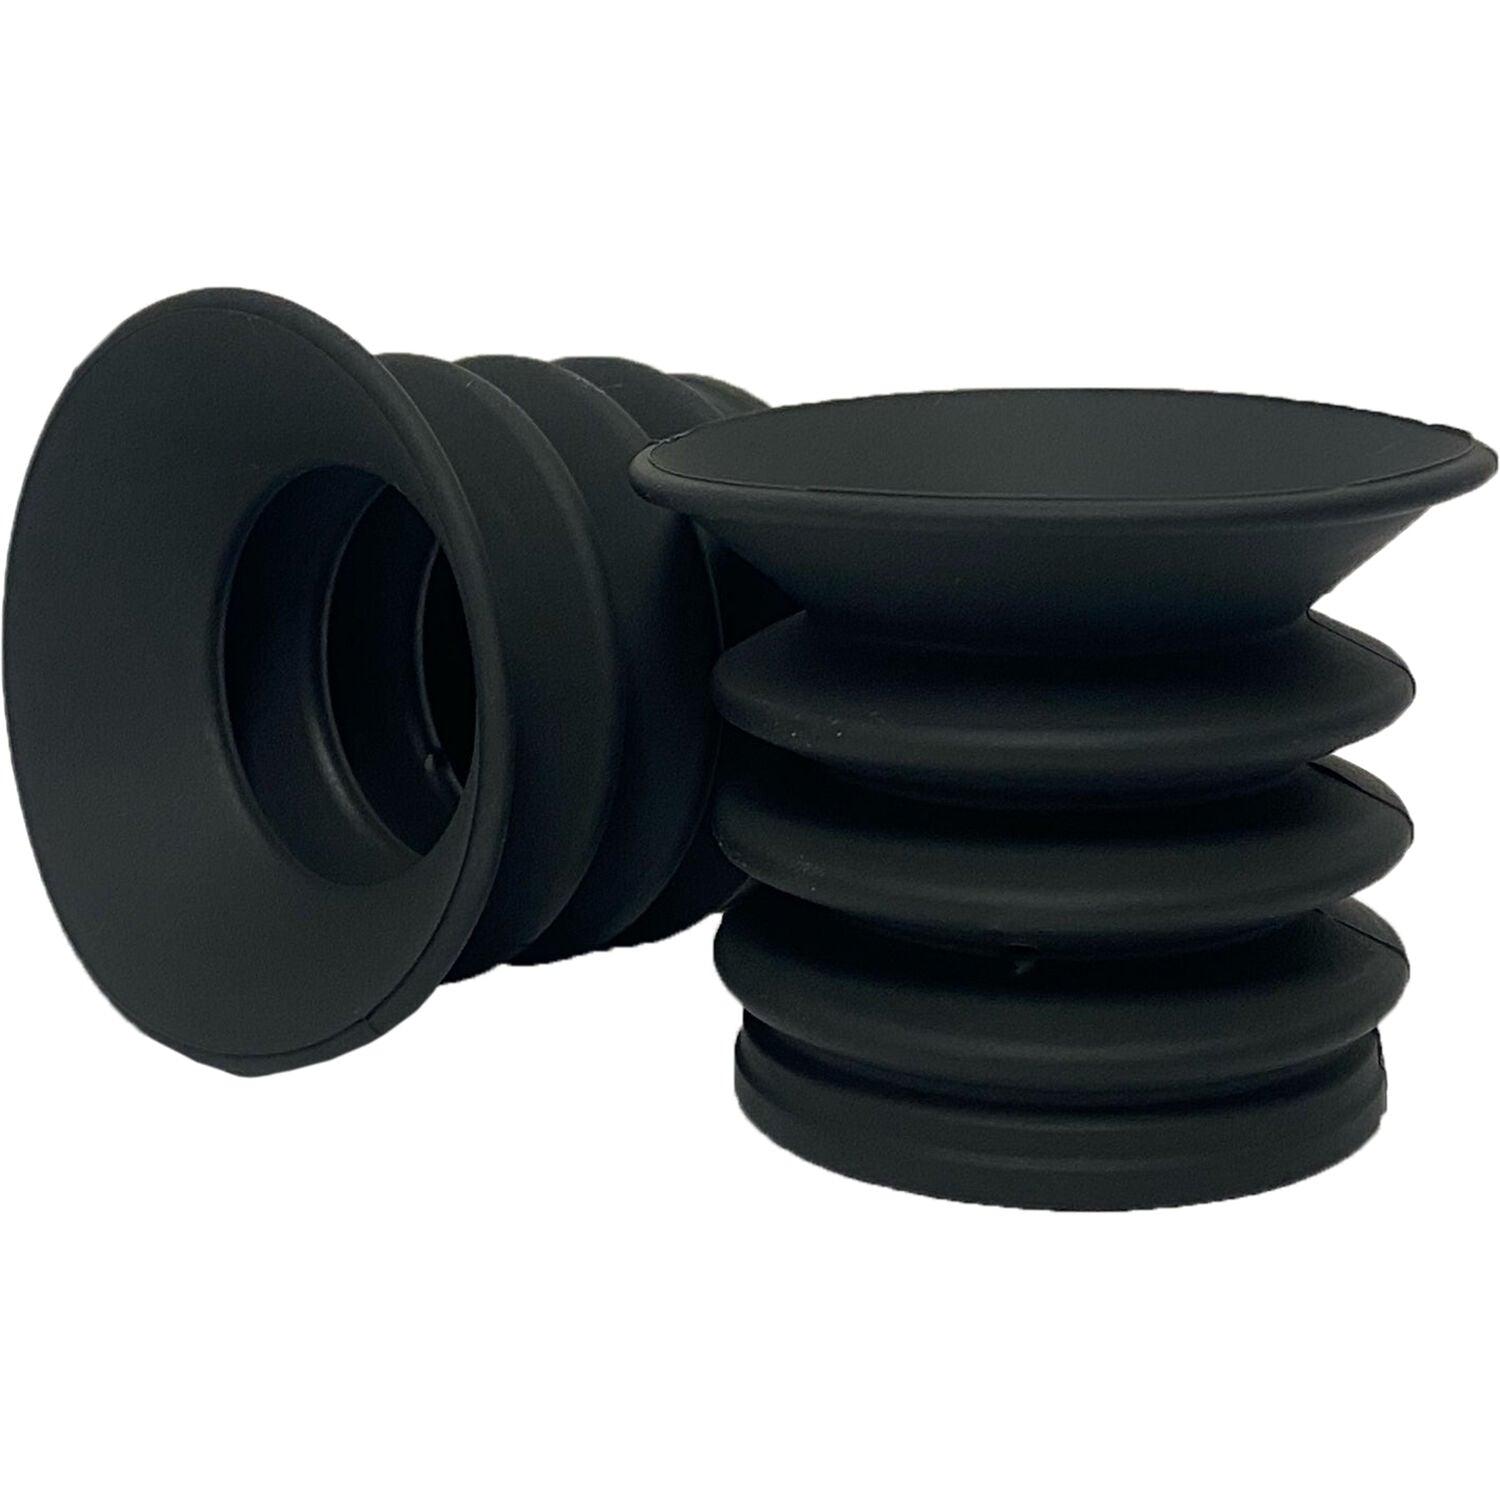 Bering Optics Rubber Eye Cup/Piece for Hogster, Super Hogster